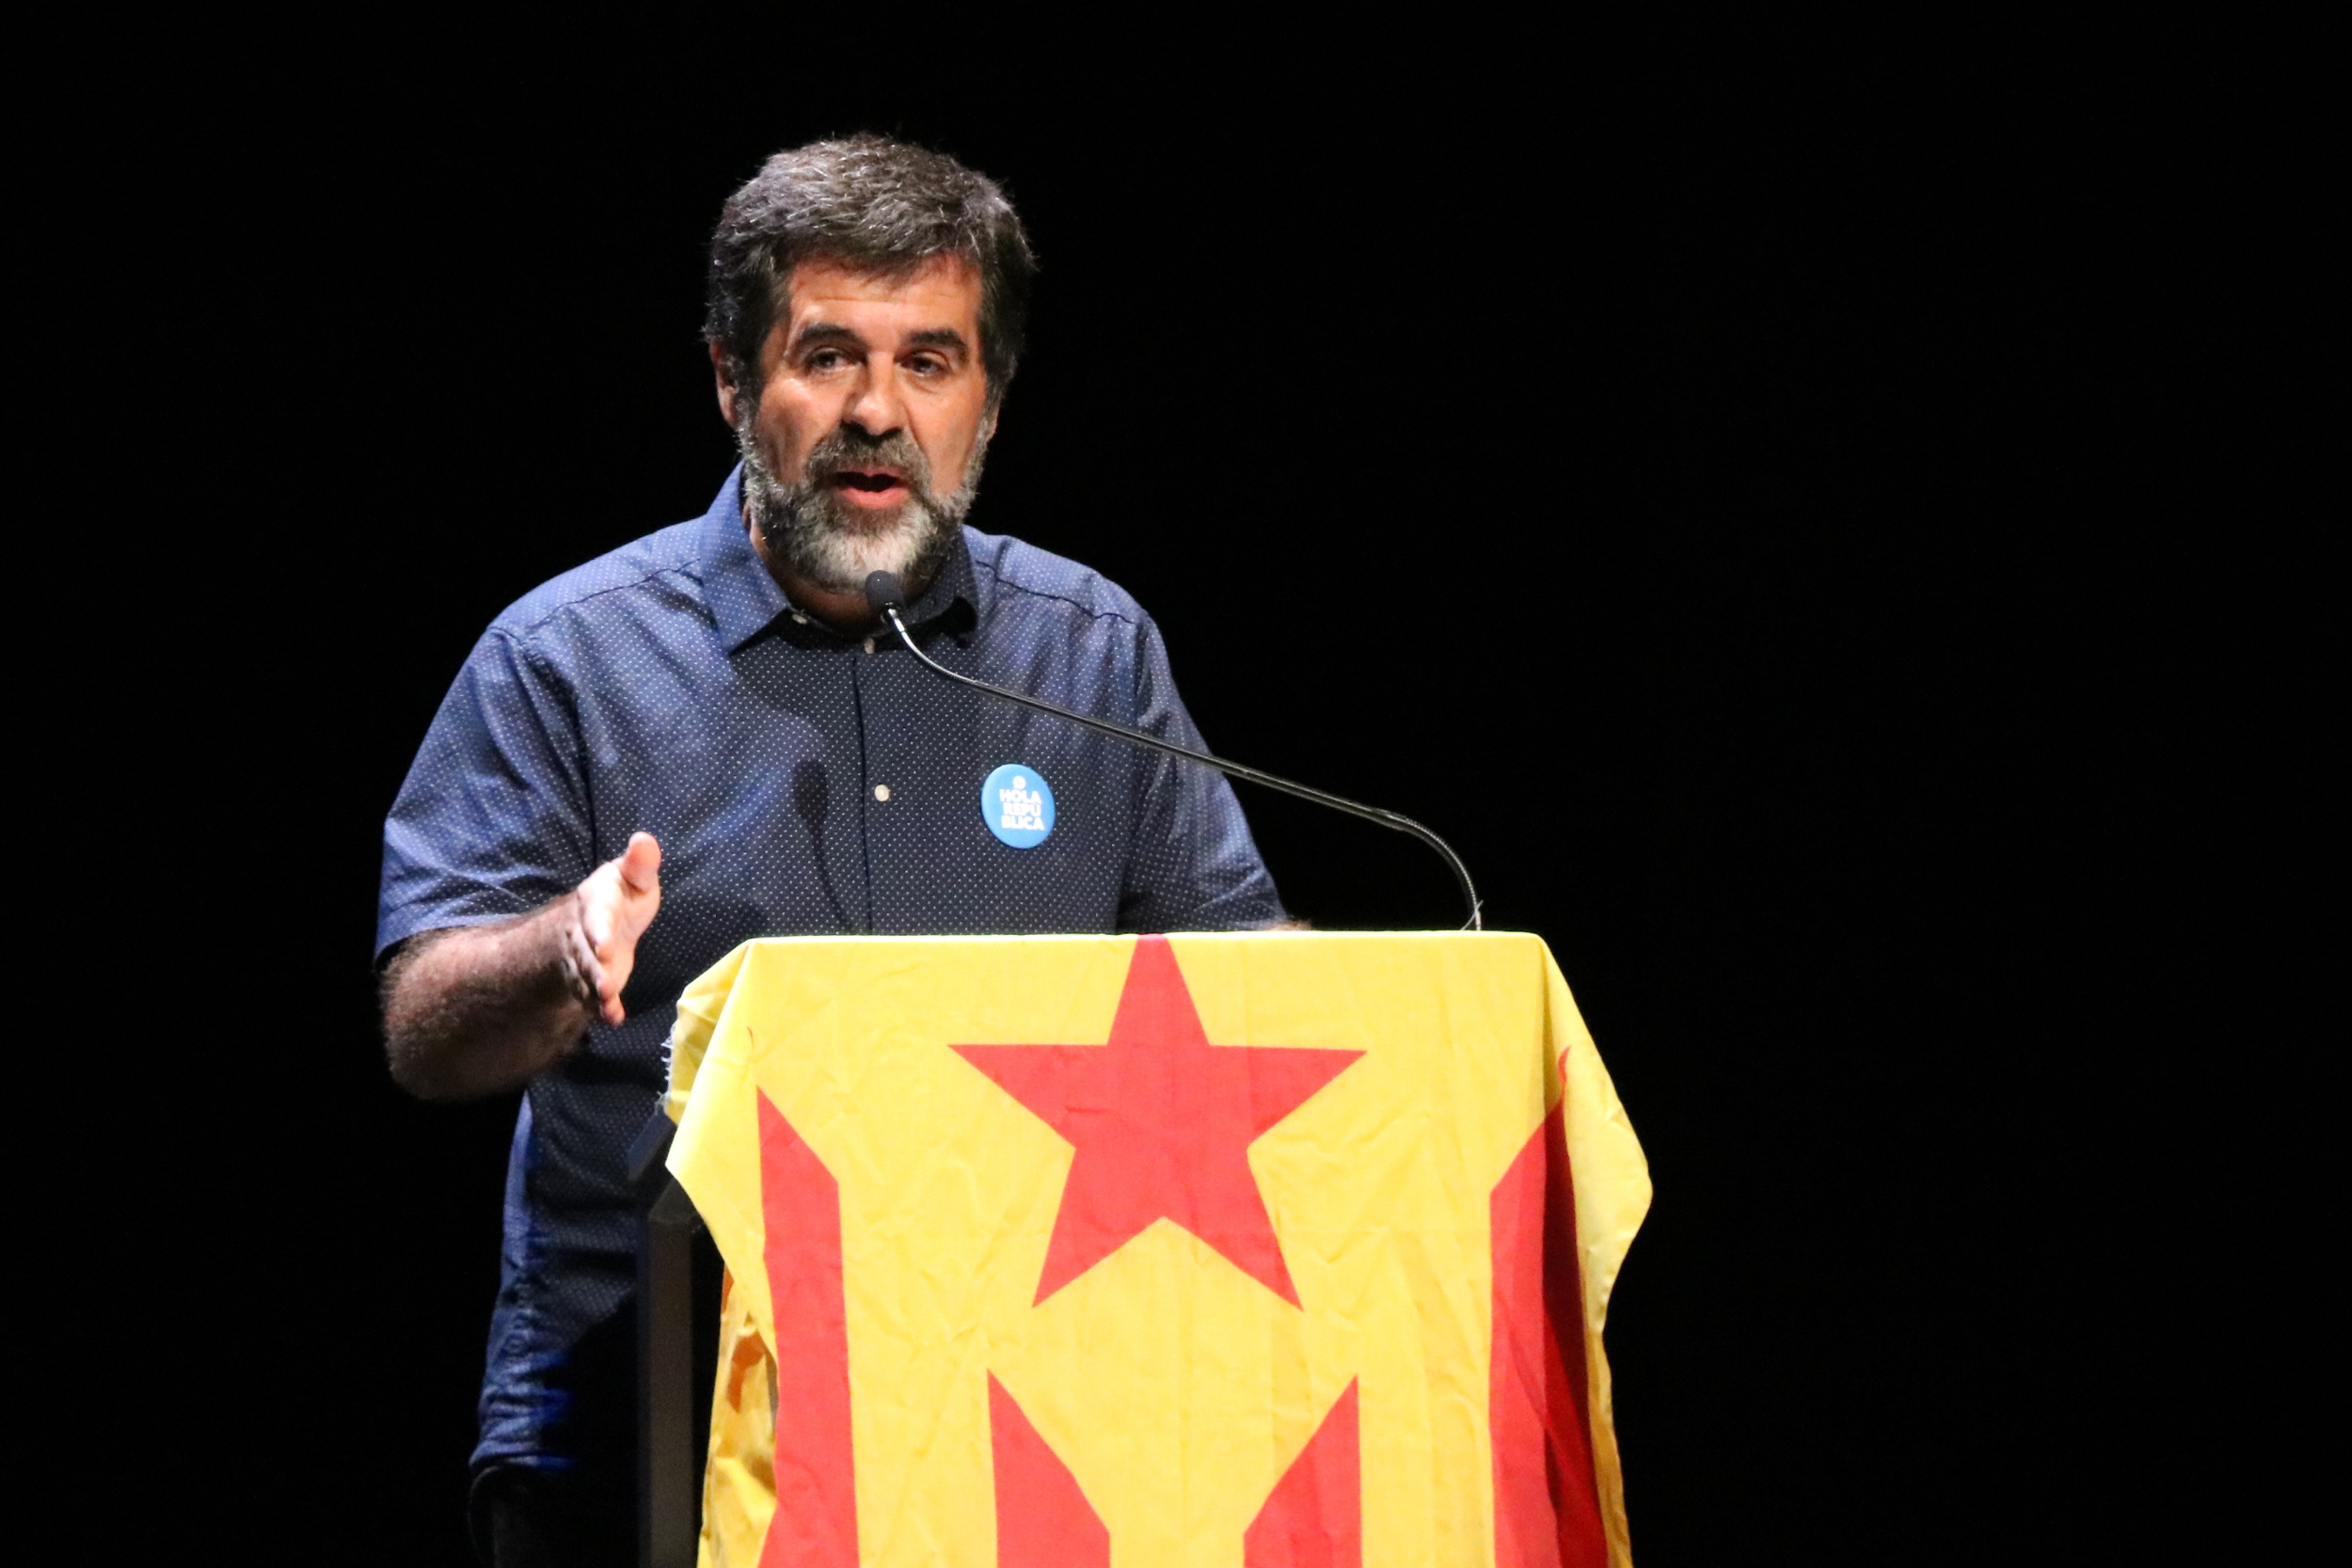 Former ANC president and number two on the Together for Catalonia ticket Jordi Sànchez speaks on September 24 2017 (by Núria Julià)